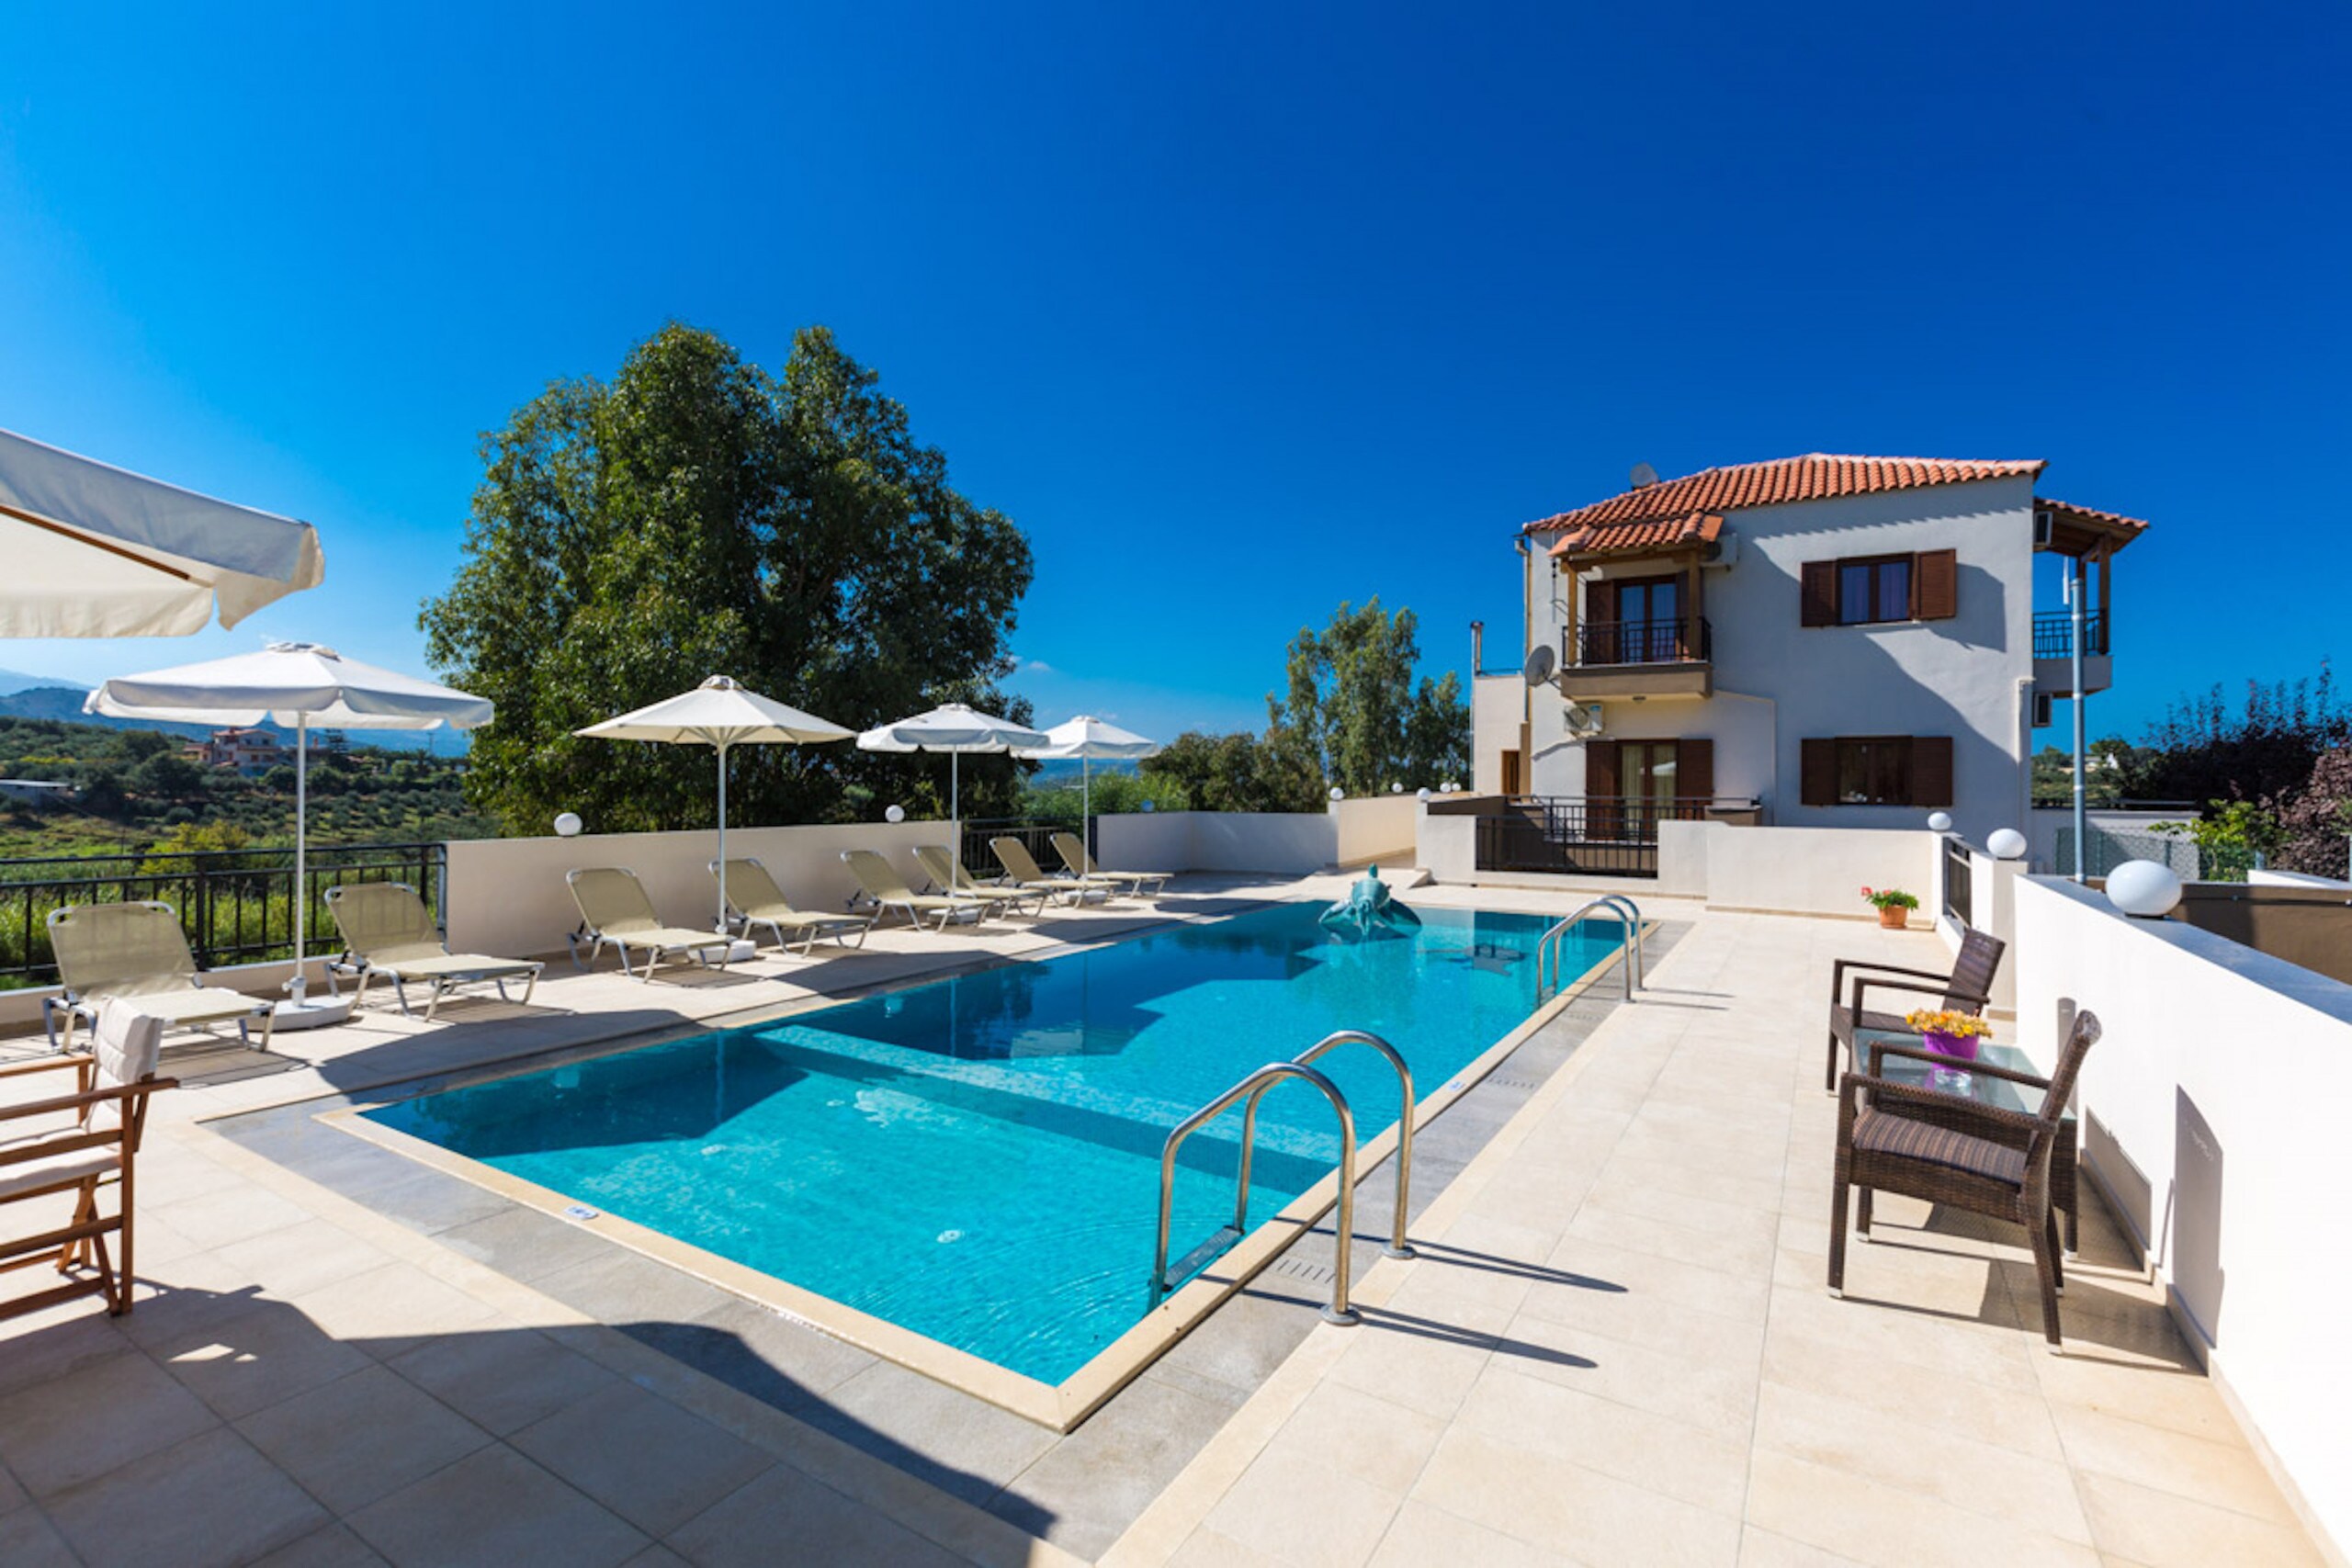 Aspect of the villa and pool terrace!